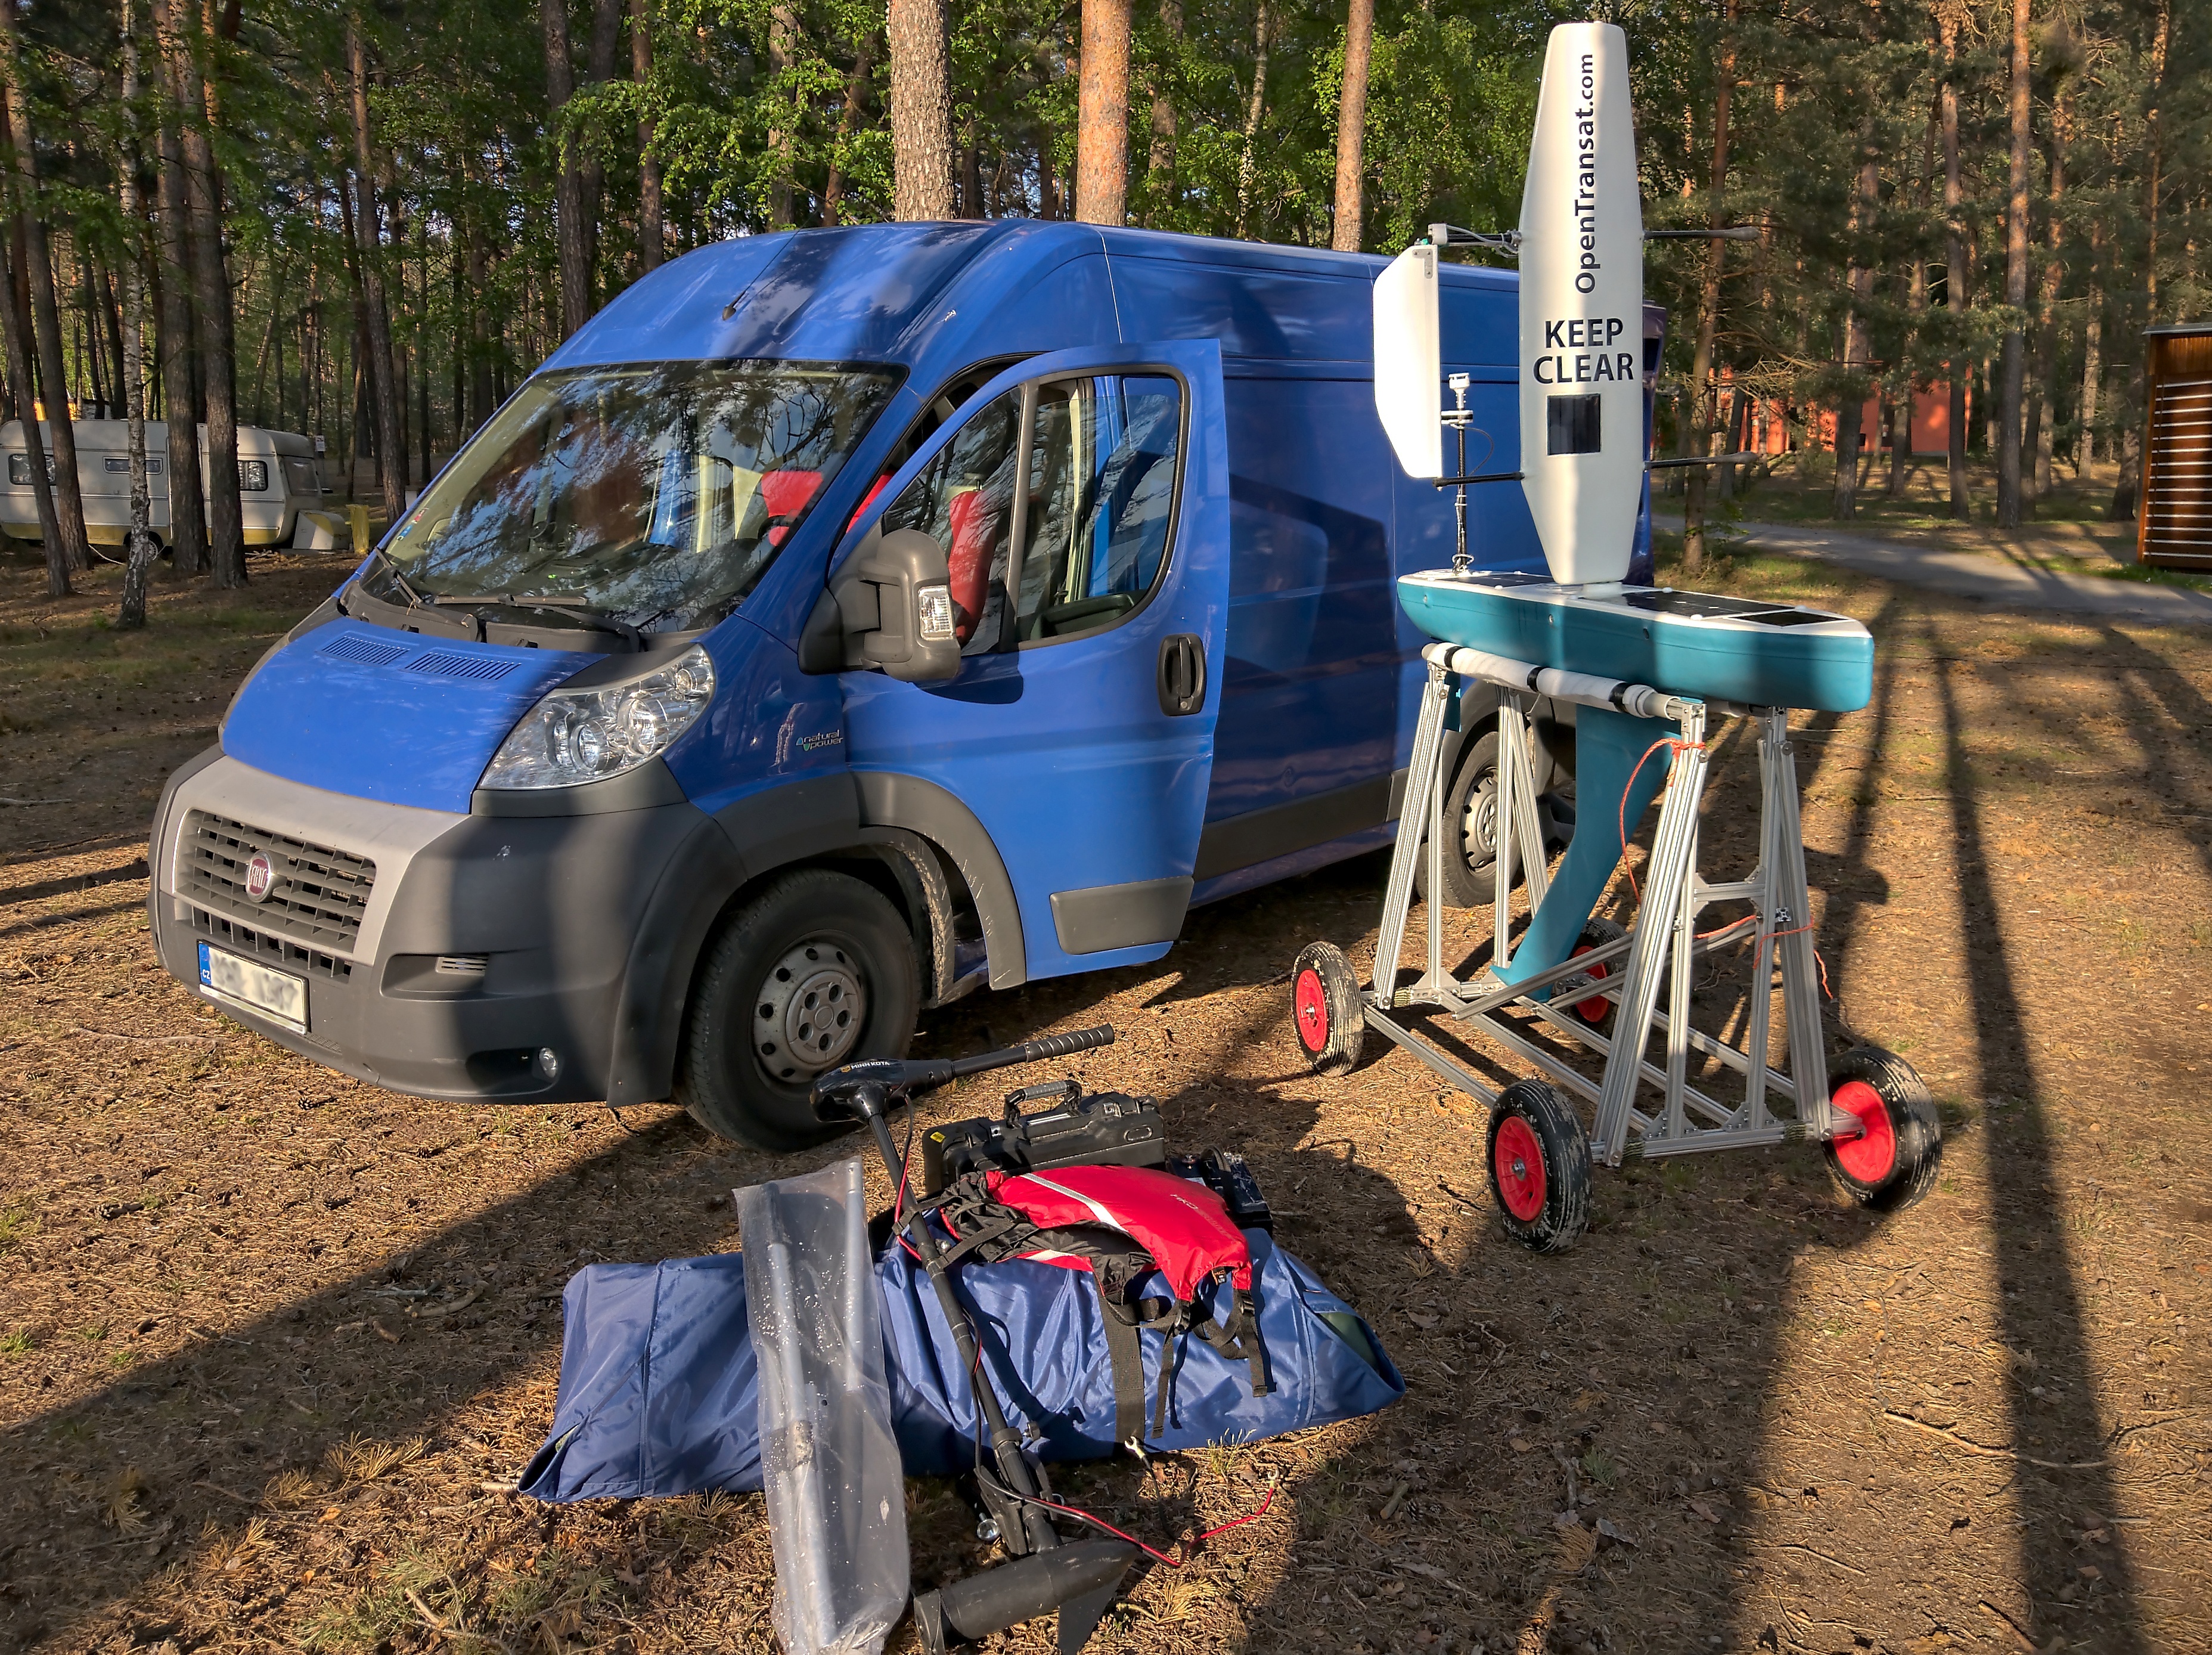 Fiat Ducato 2 8 Jtd Problems: Discover the Hidden Challenges